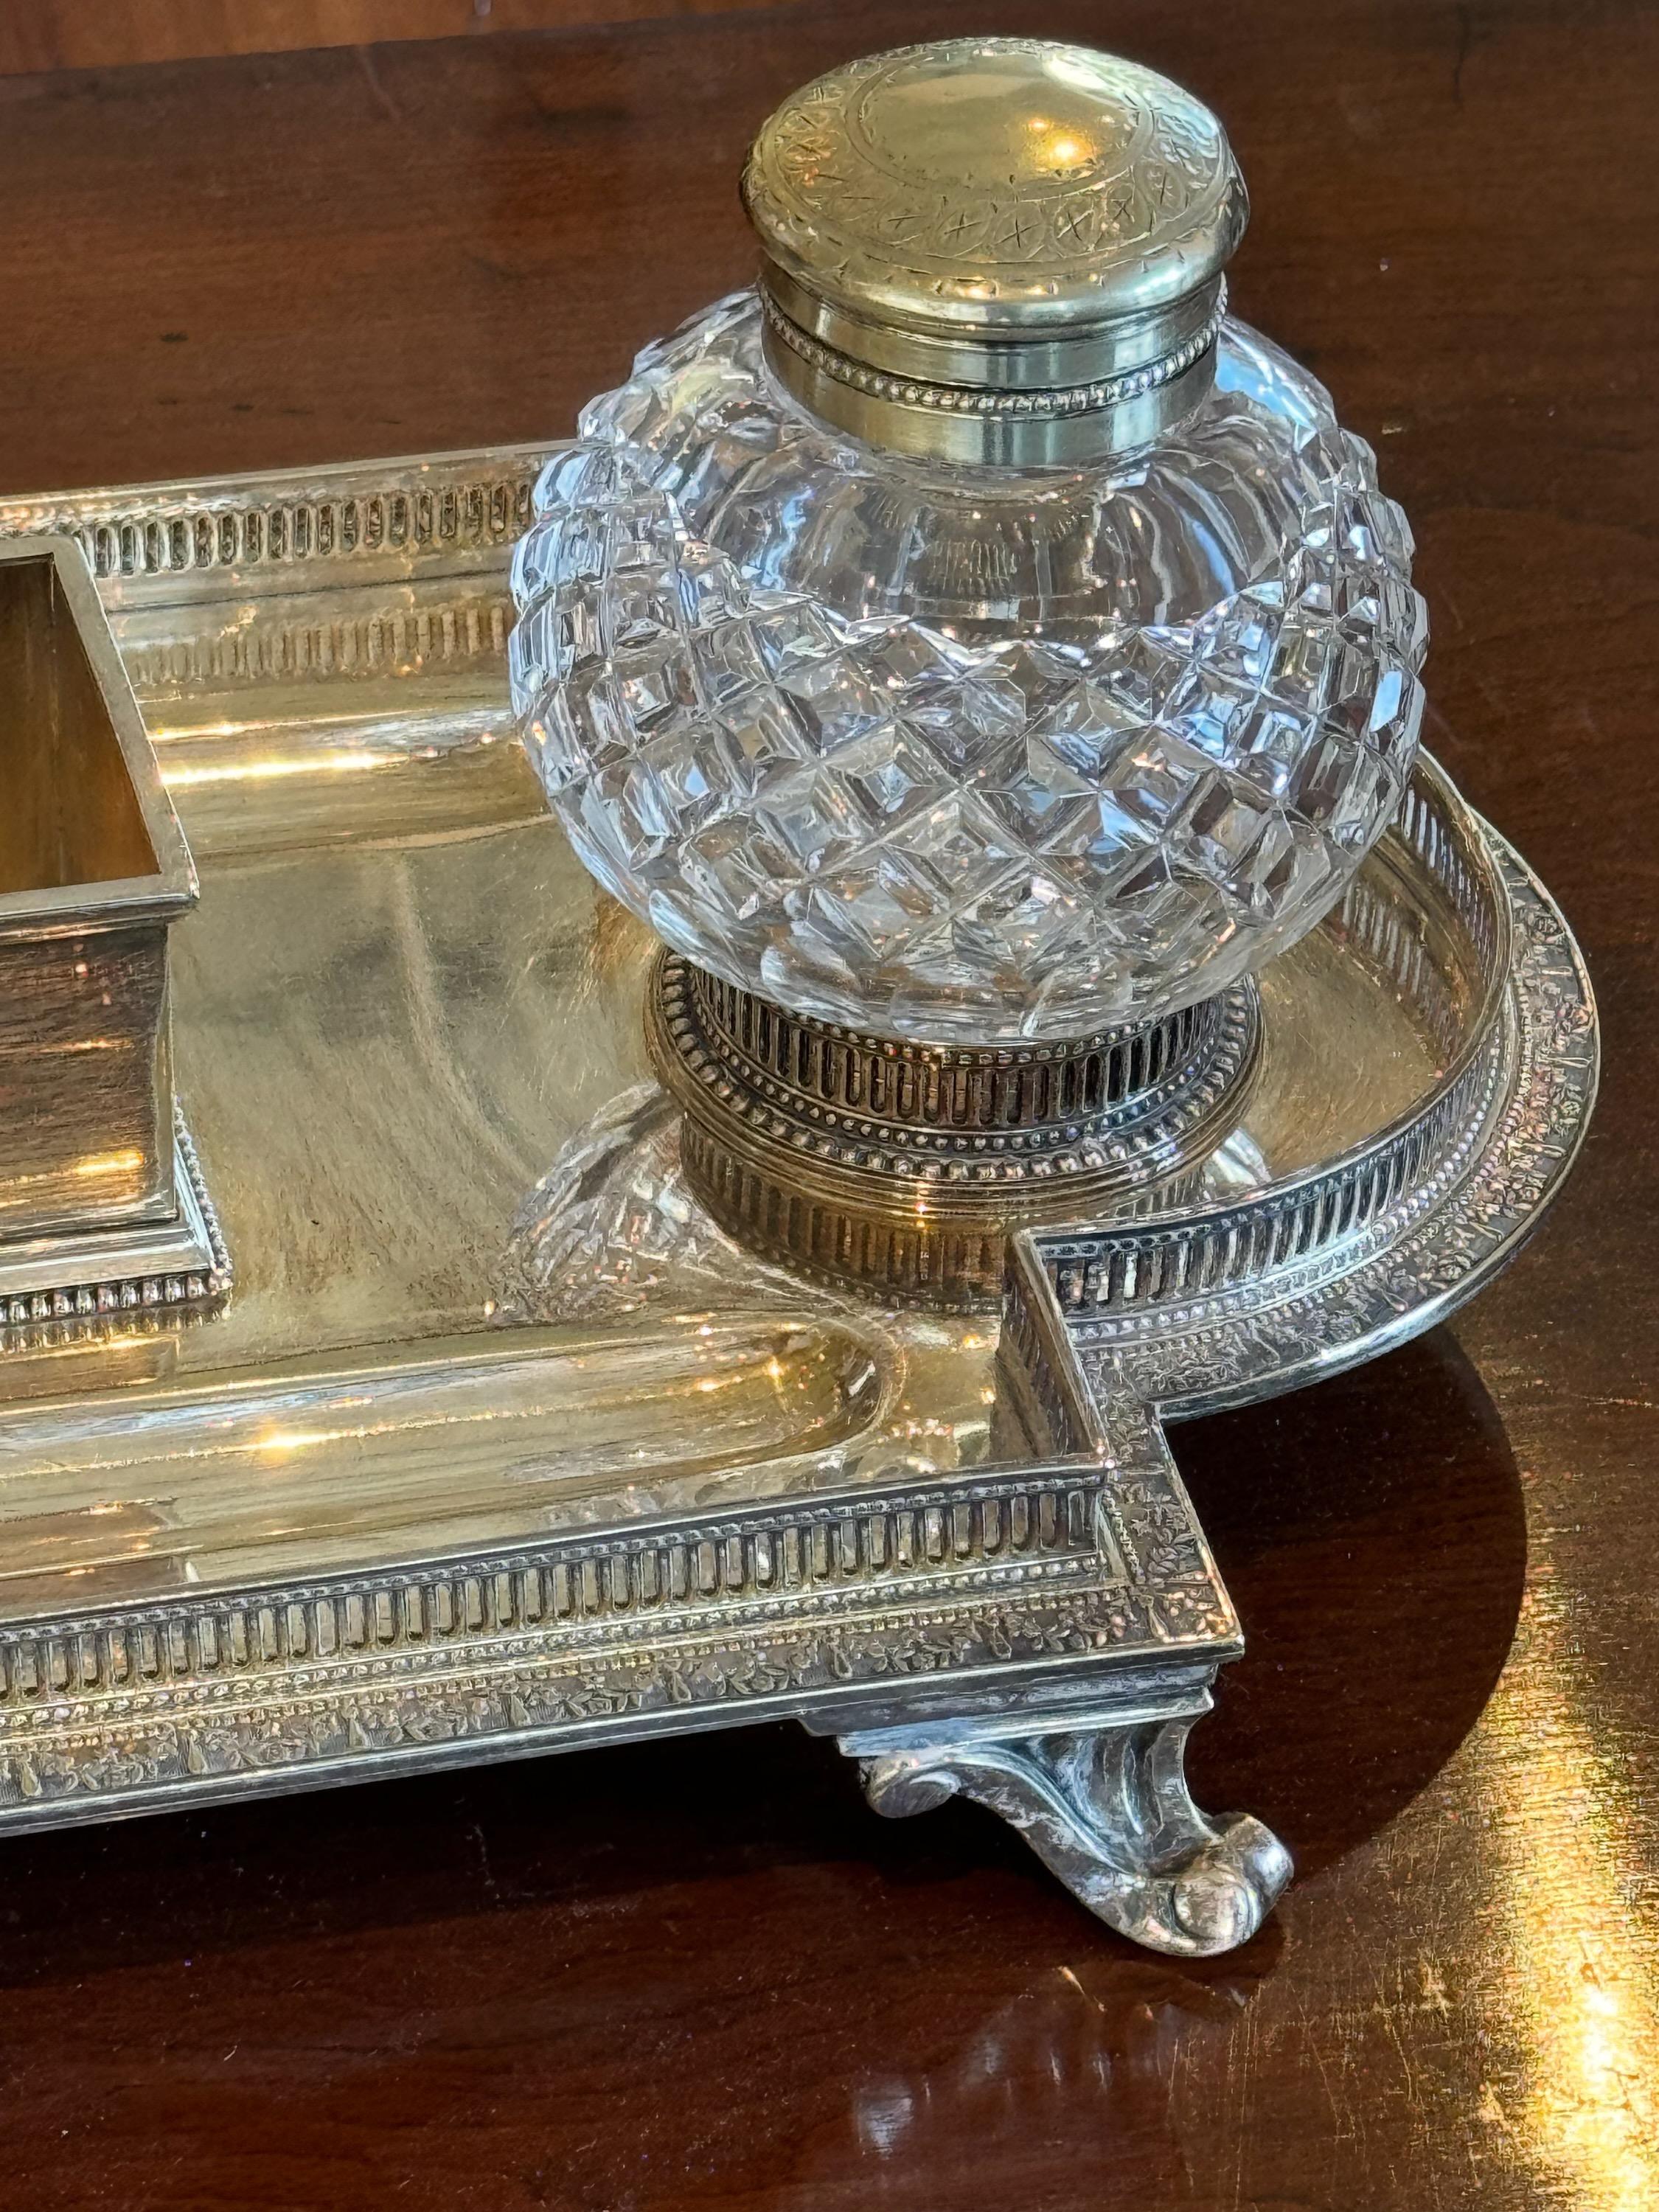 A beautiful desk set, silver plate and crystal.